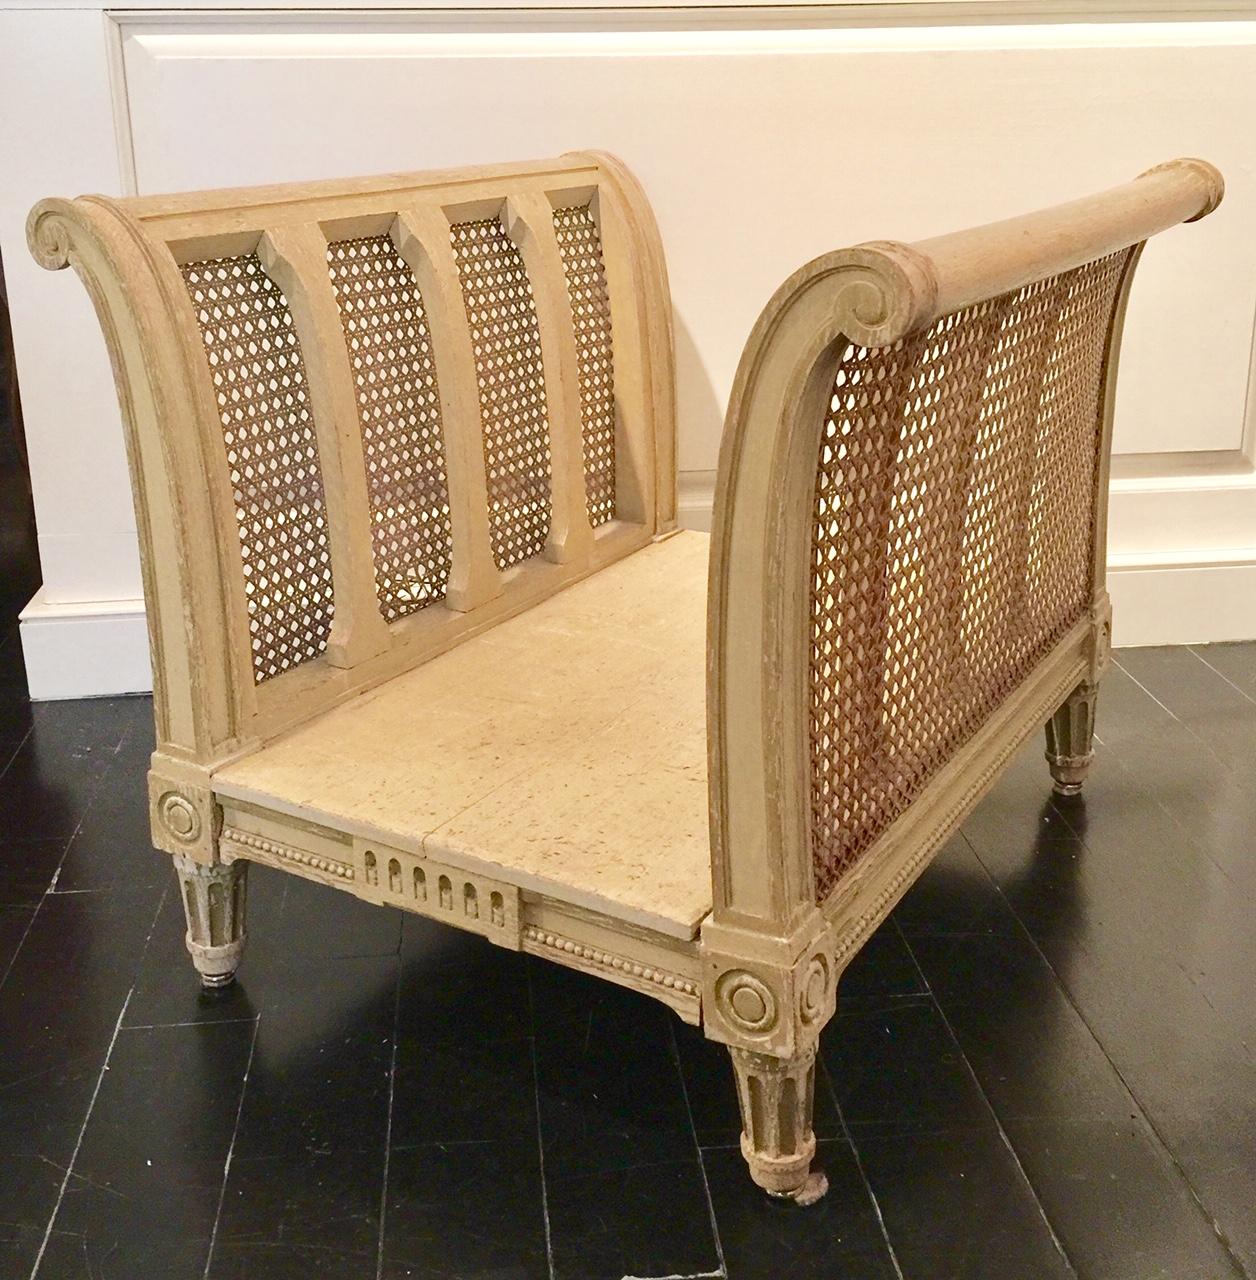 From a private French home in Aix-en-Provence, provided by Maison Jansen and typical of their whimsical and unique style, this rare decorative pair of Louis XVI style caned stands were designed in basket form for multiple use. As a dog bed, magazine